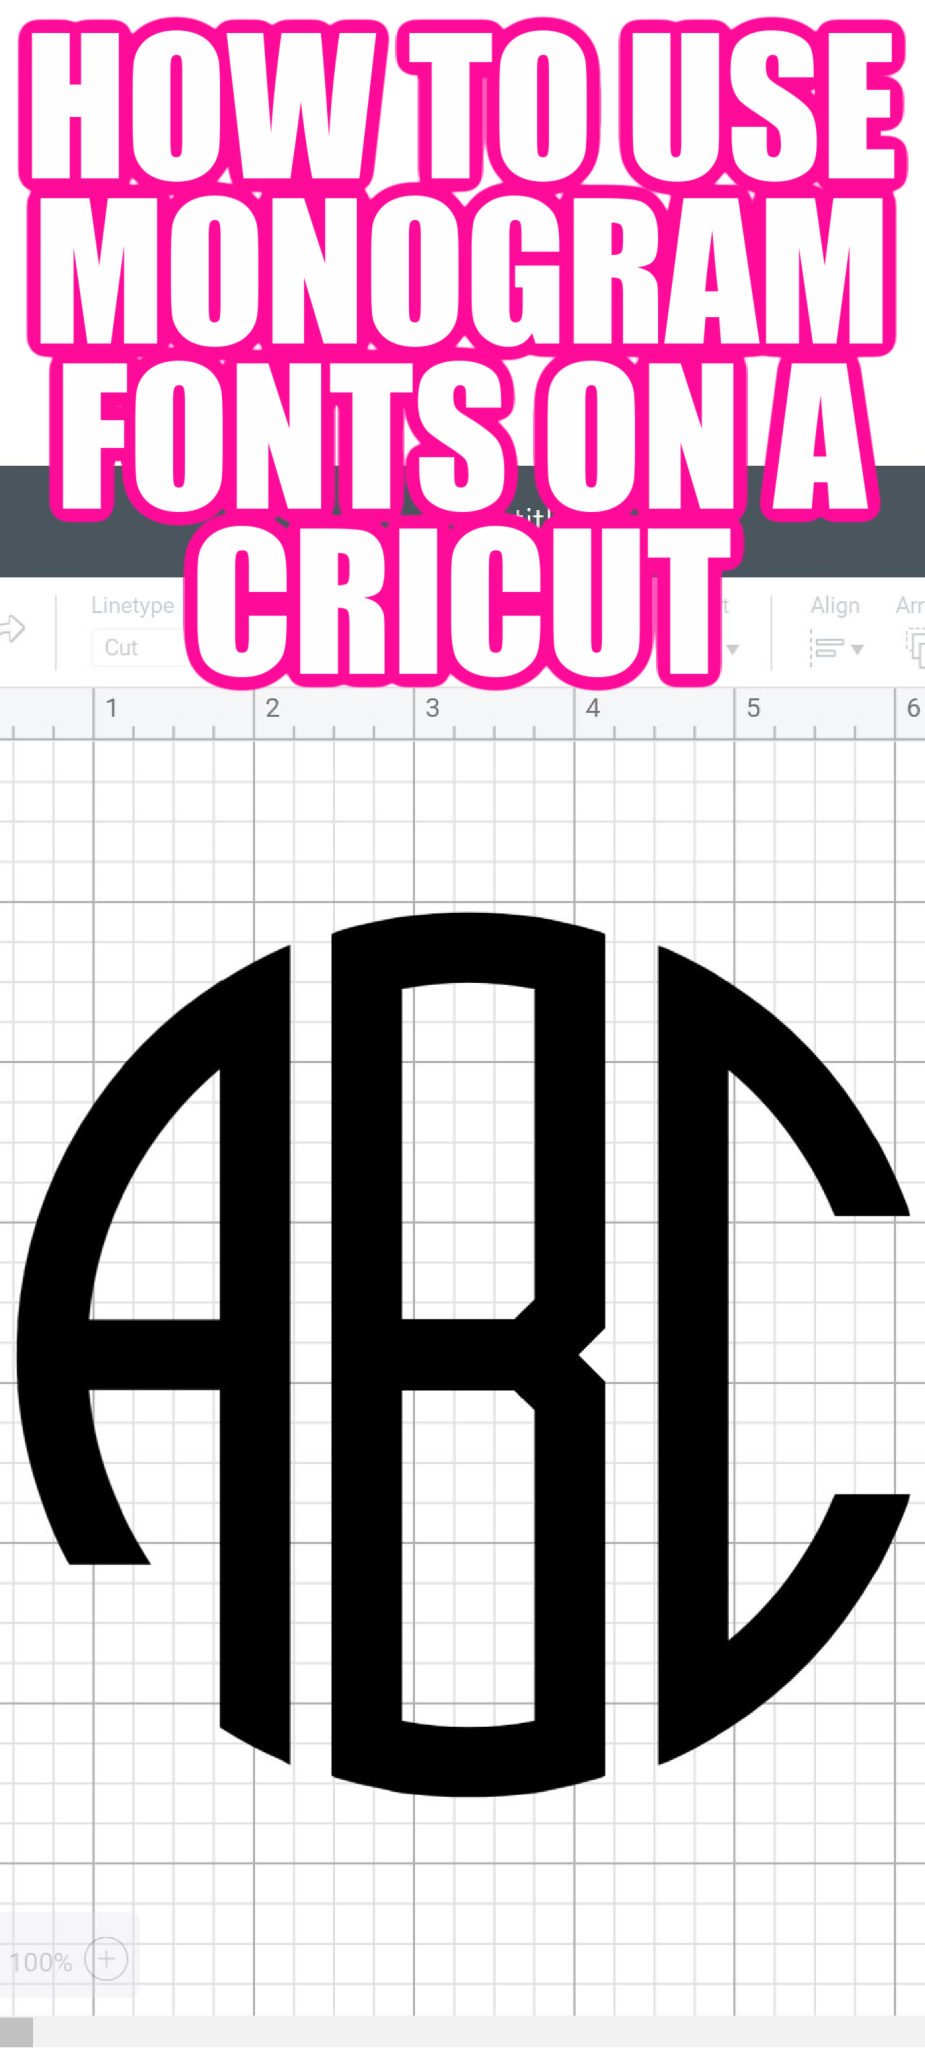 Download The Best Monogram Fonts And Using Them In A Cricut The Country Chic Cottage